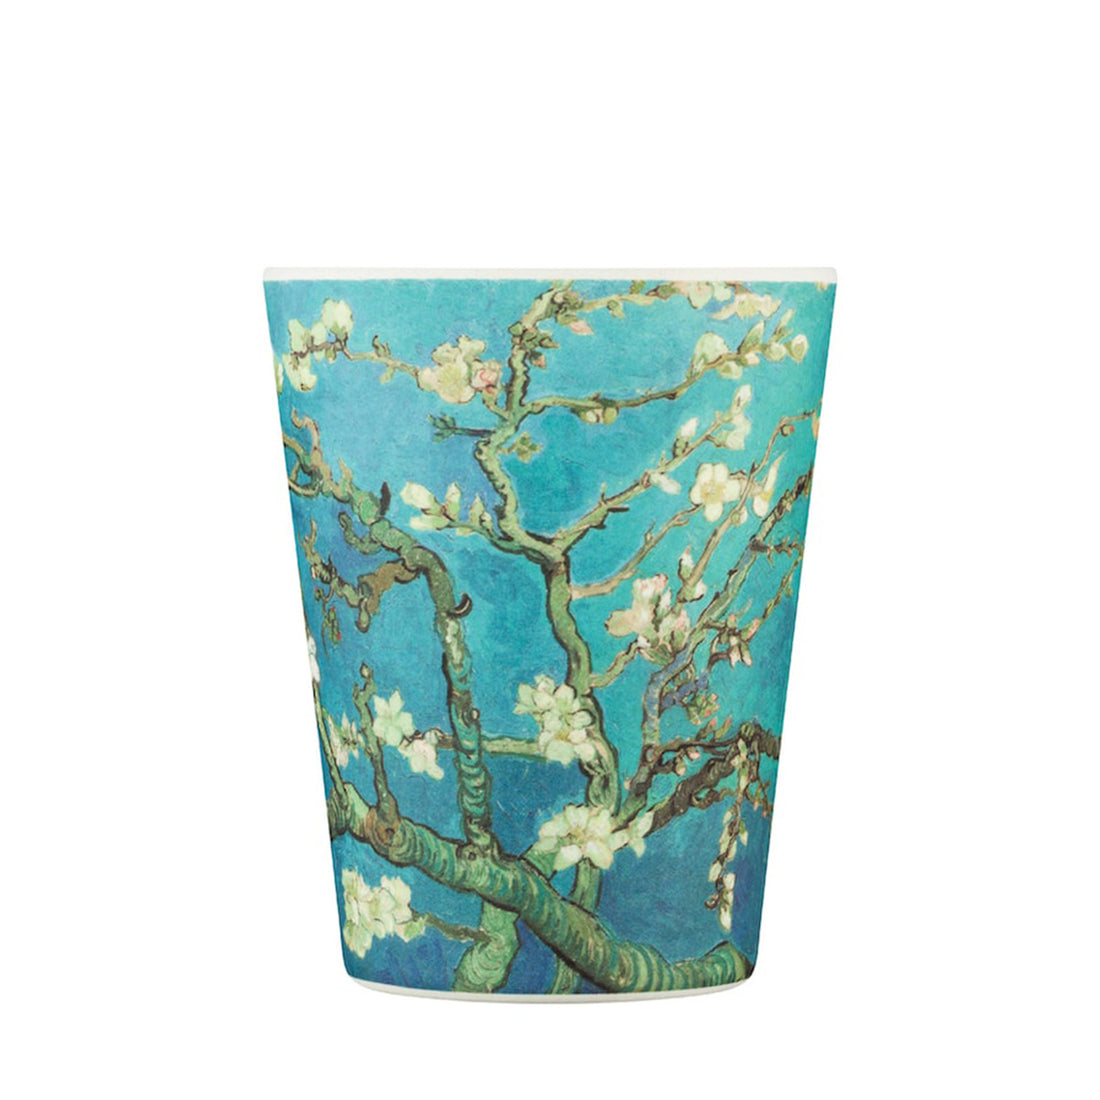 Ecoffee, Ecoffee Cup Reusable Bamboo Travel Cup 0.34l / 12 oz. - Van Gogh Museum Almond Blossom, Redber Coffee